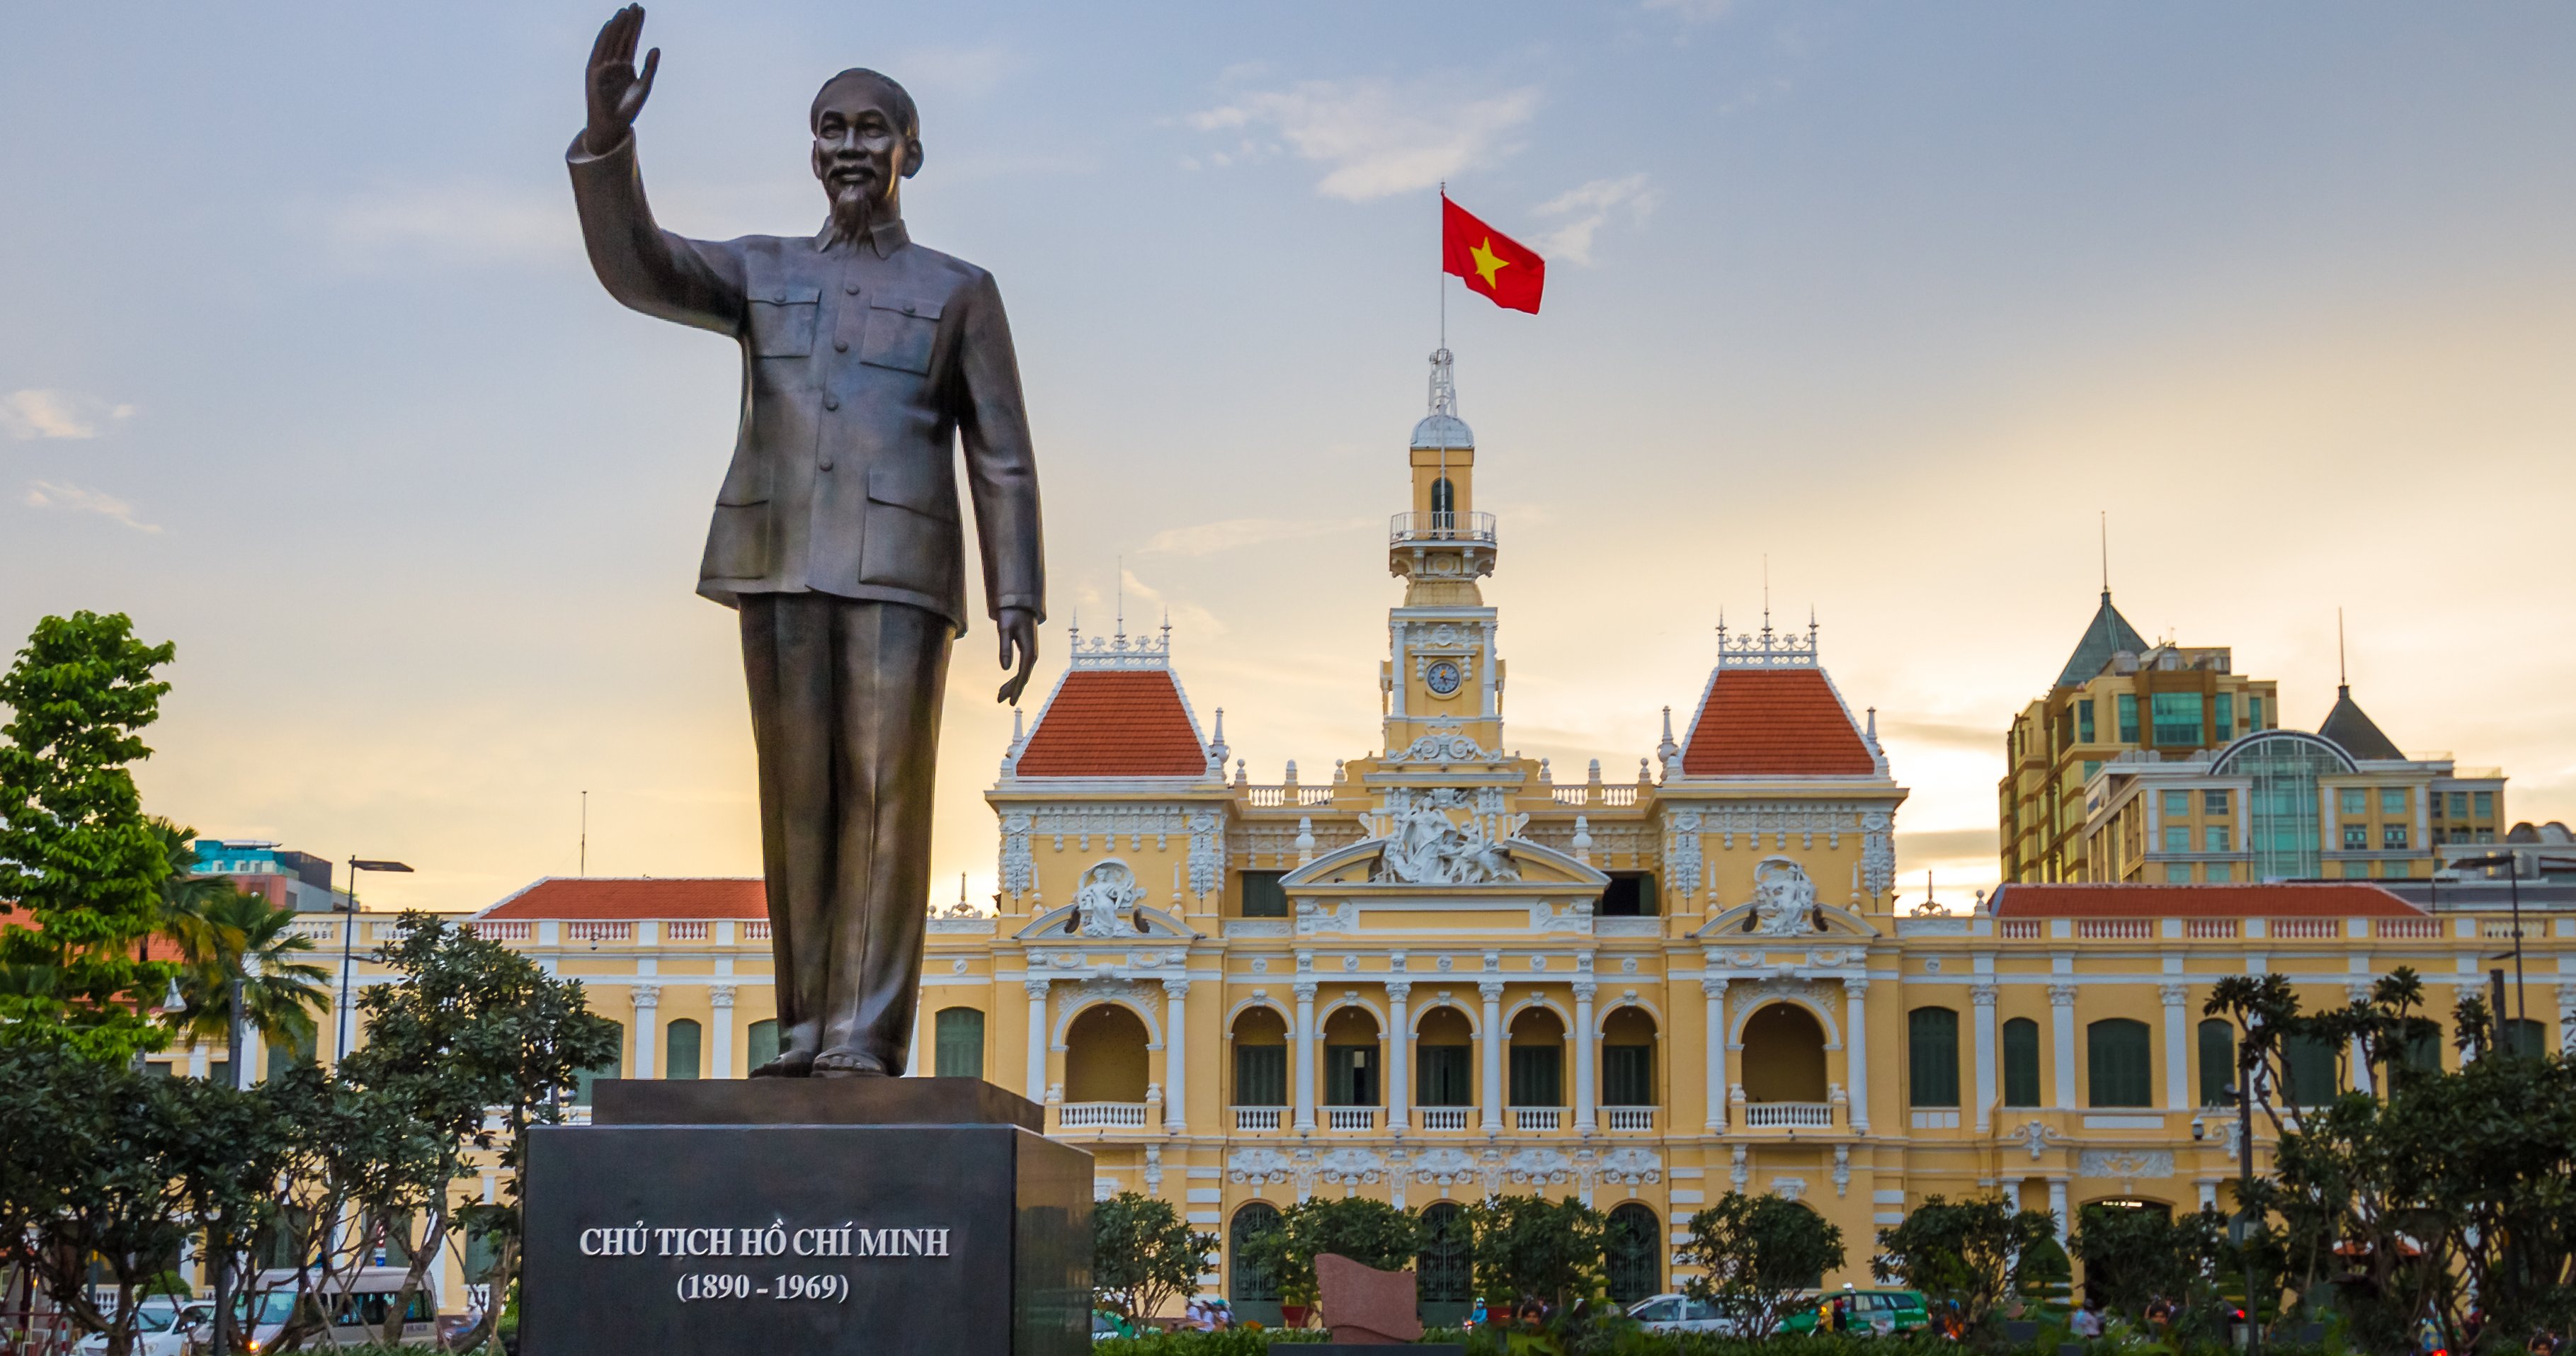 Best things to do in ho chi minh city vietnam Best Things To Do In Ho Chi Minh City Vietnam Ho Chi Minh City Tours